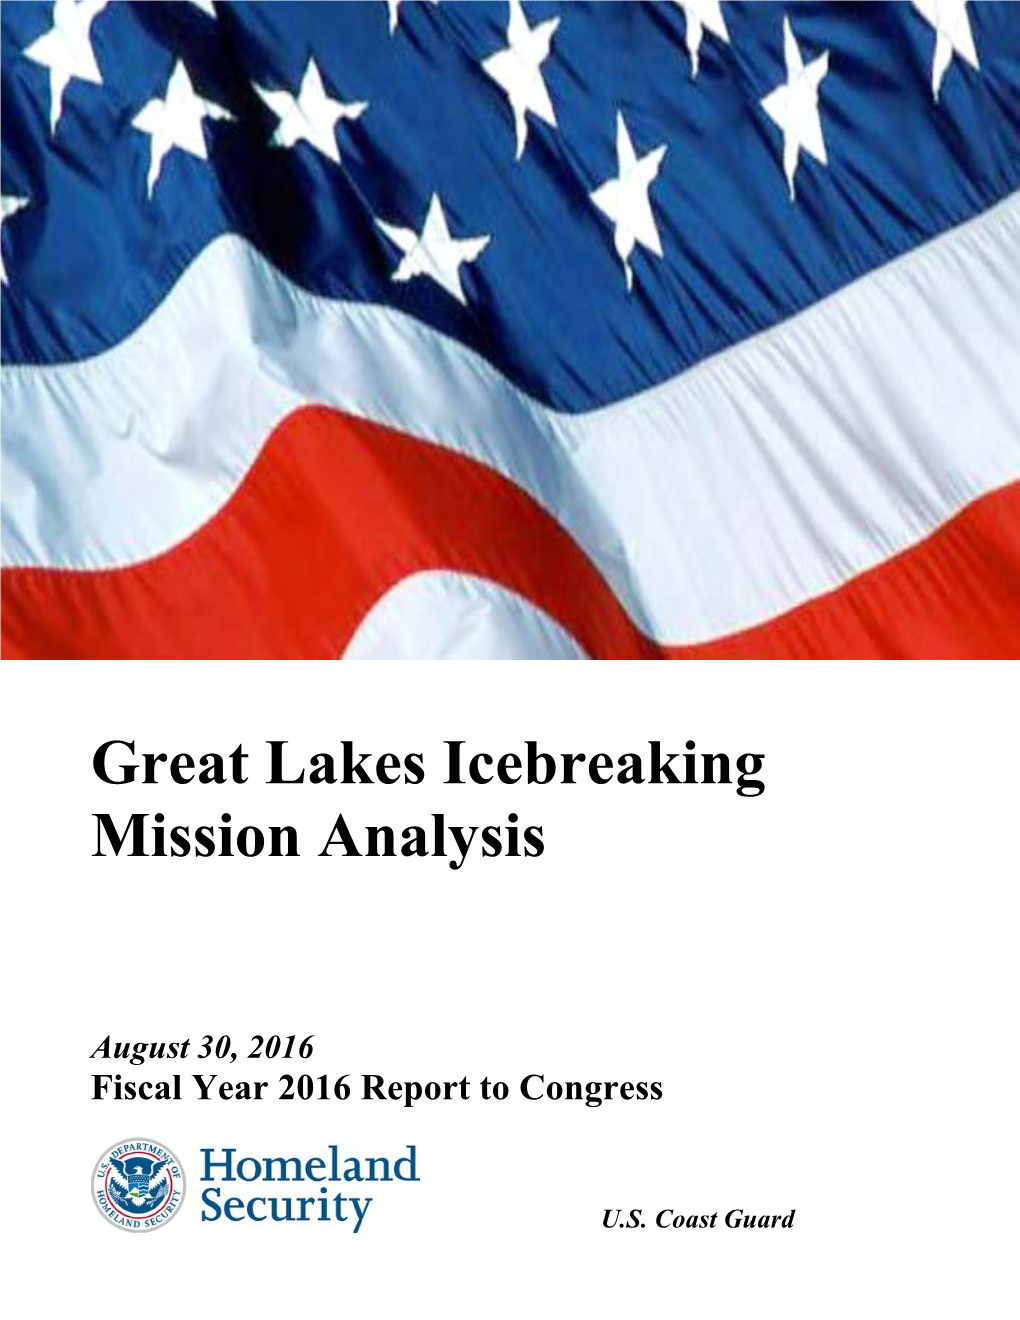 Great Lakes Icebreaking Mission Analysis